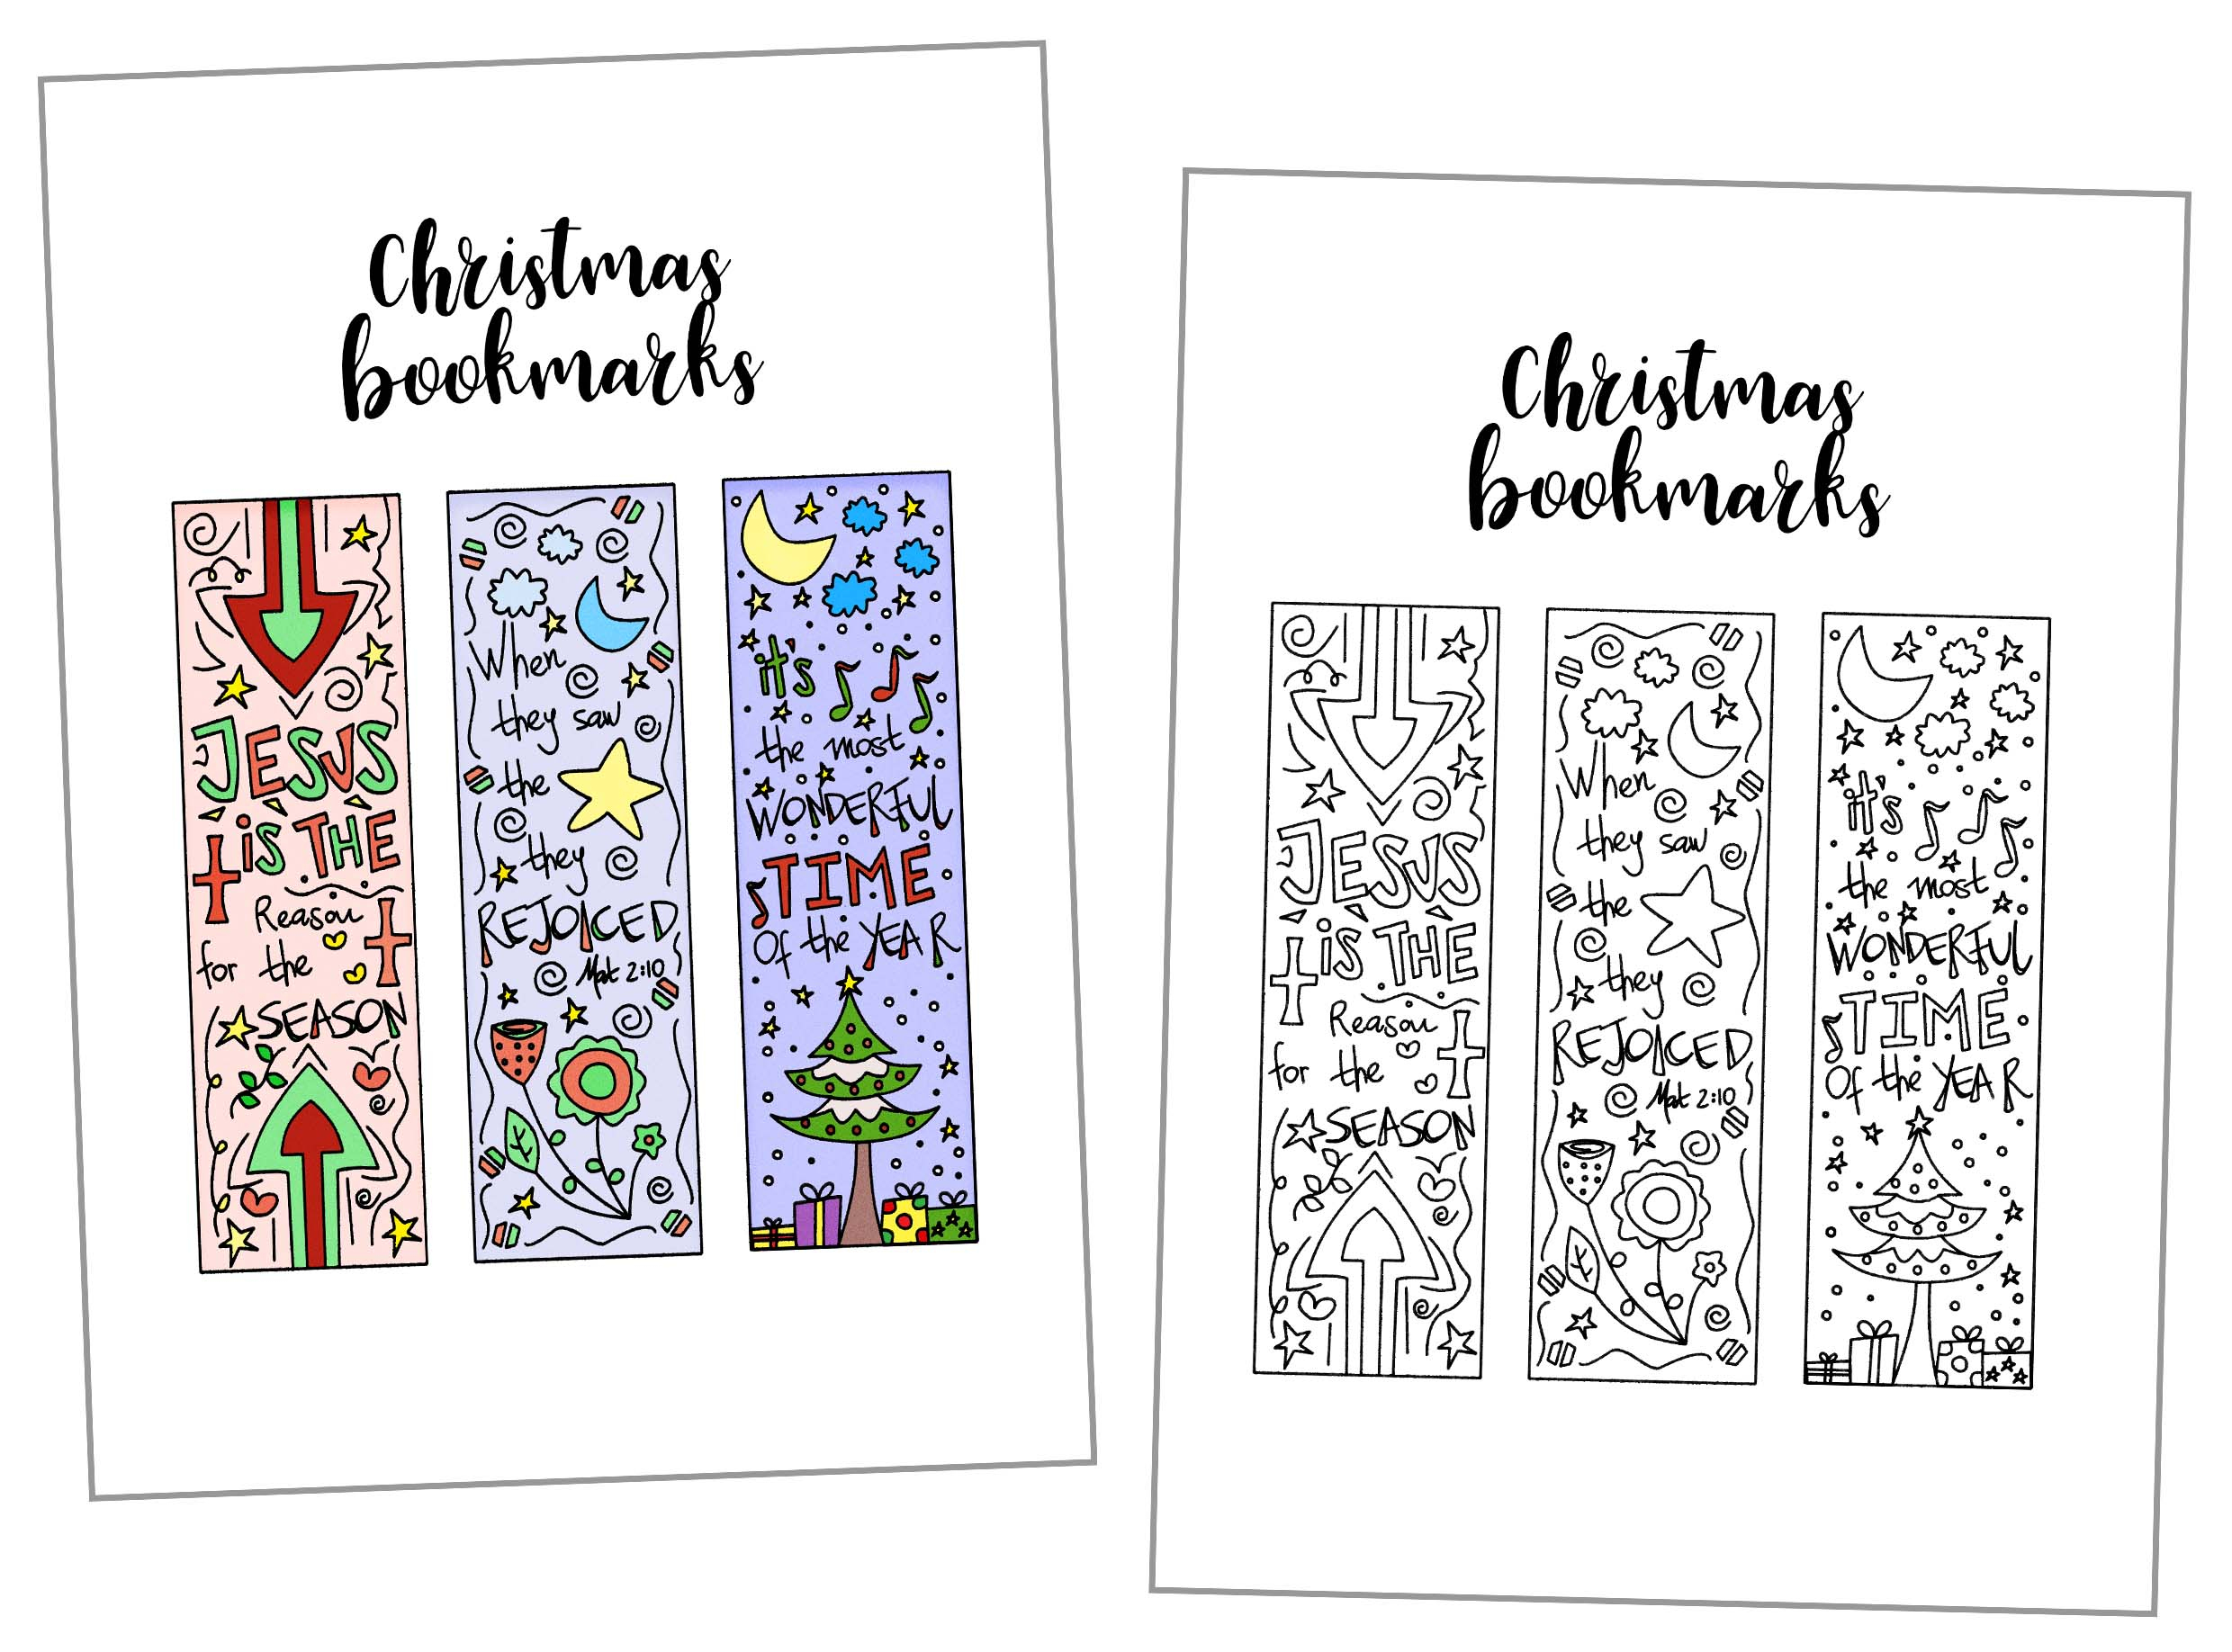 Coloring Christmas Bookmarks Free Printable ~ Daydream Into Reality - Free Printable Christmas Bookmarks To Color